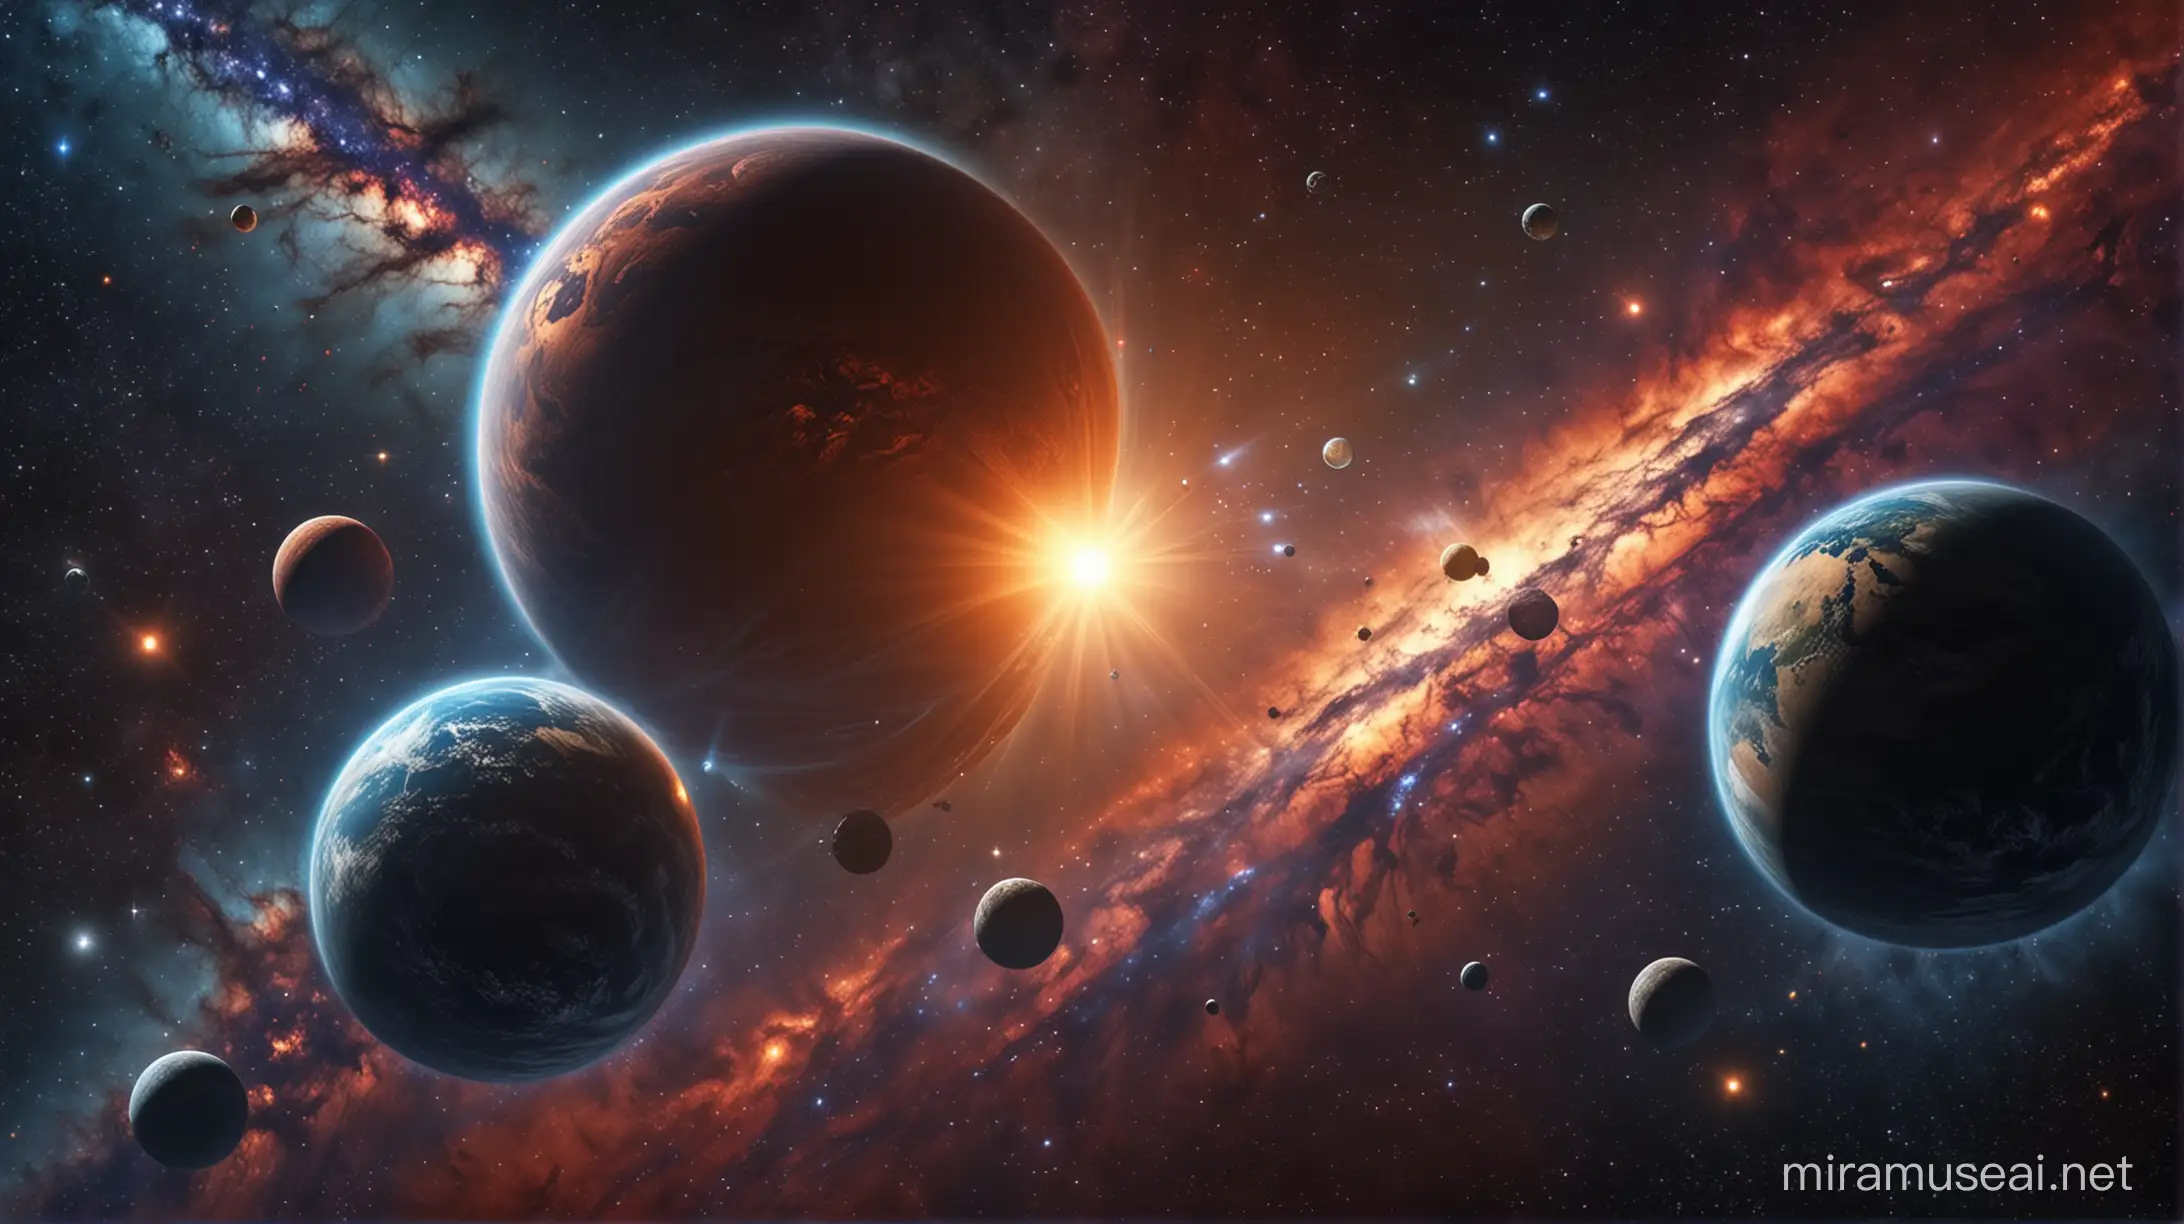 Image of beautiful Earth-like exoplanets with beautiful cosmic background.